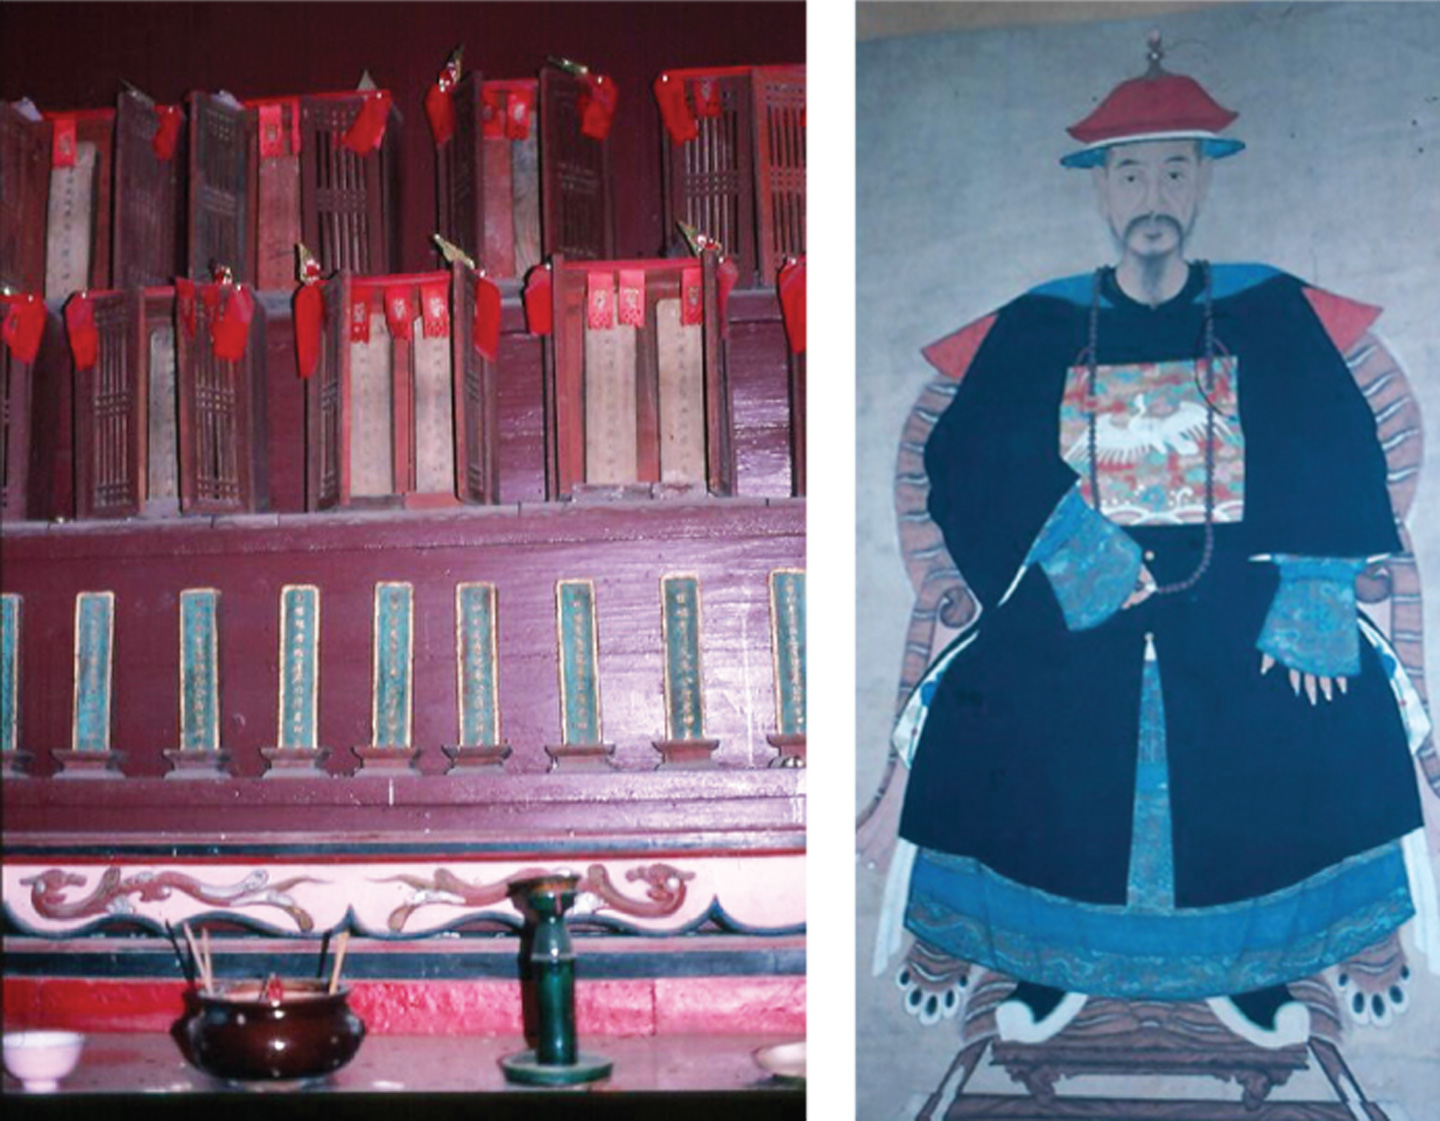 Ancestral tablets and portrait. Living halls displaying the portraits were called ‘Ying Tang’ (image hall)